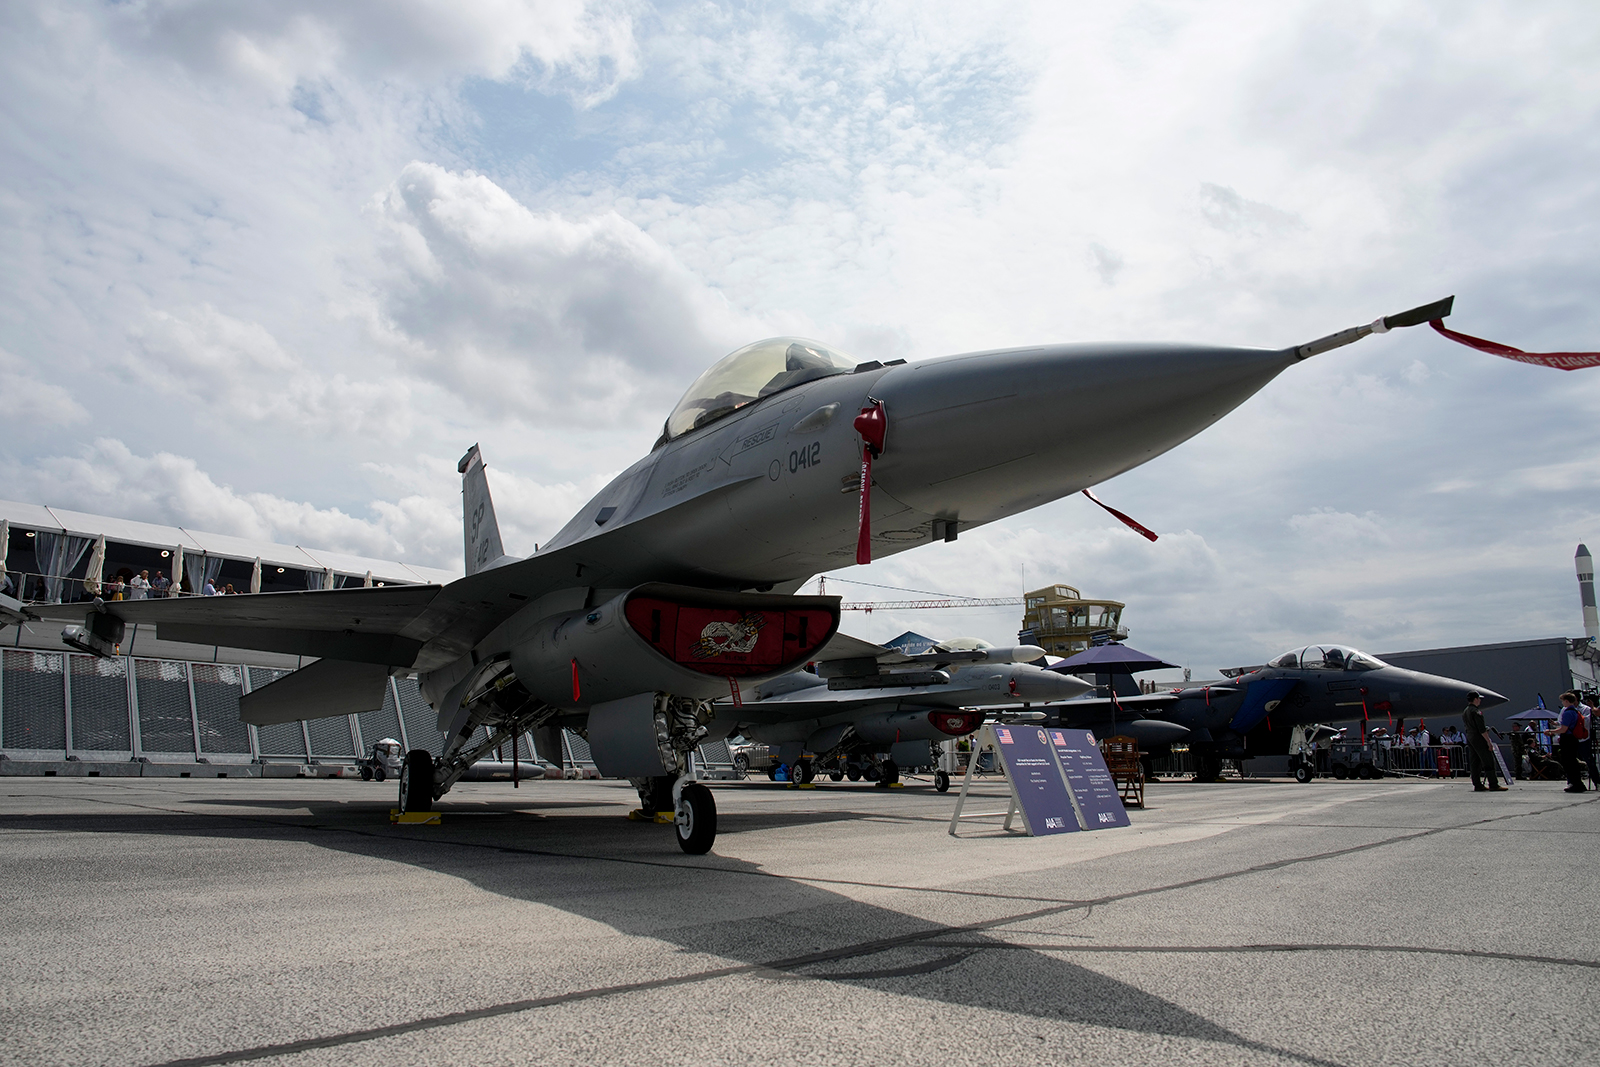 A US Air Force F-16 fighter jet is displayed at the Paris Air Show on June 20.